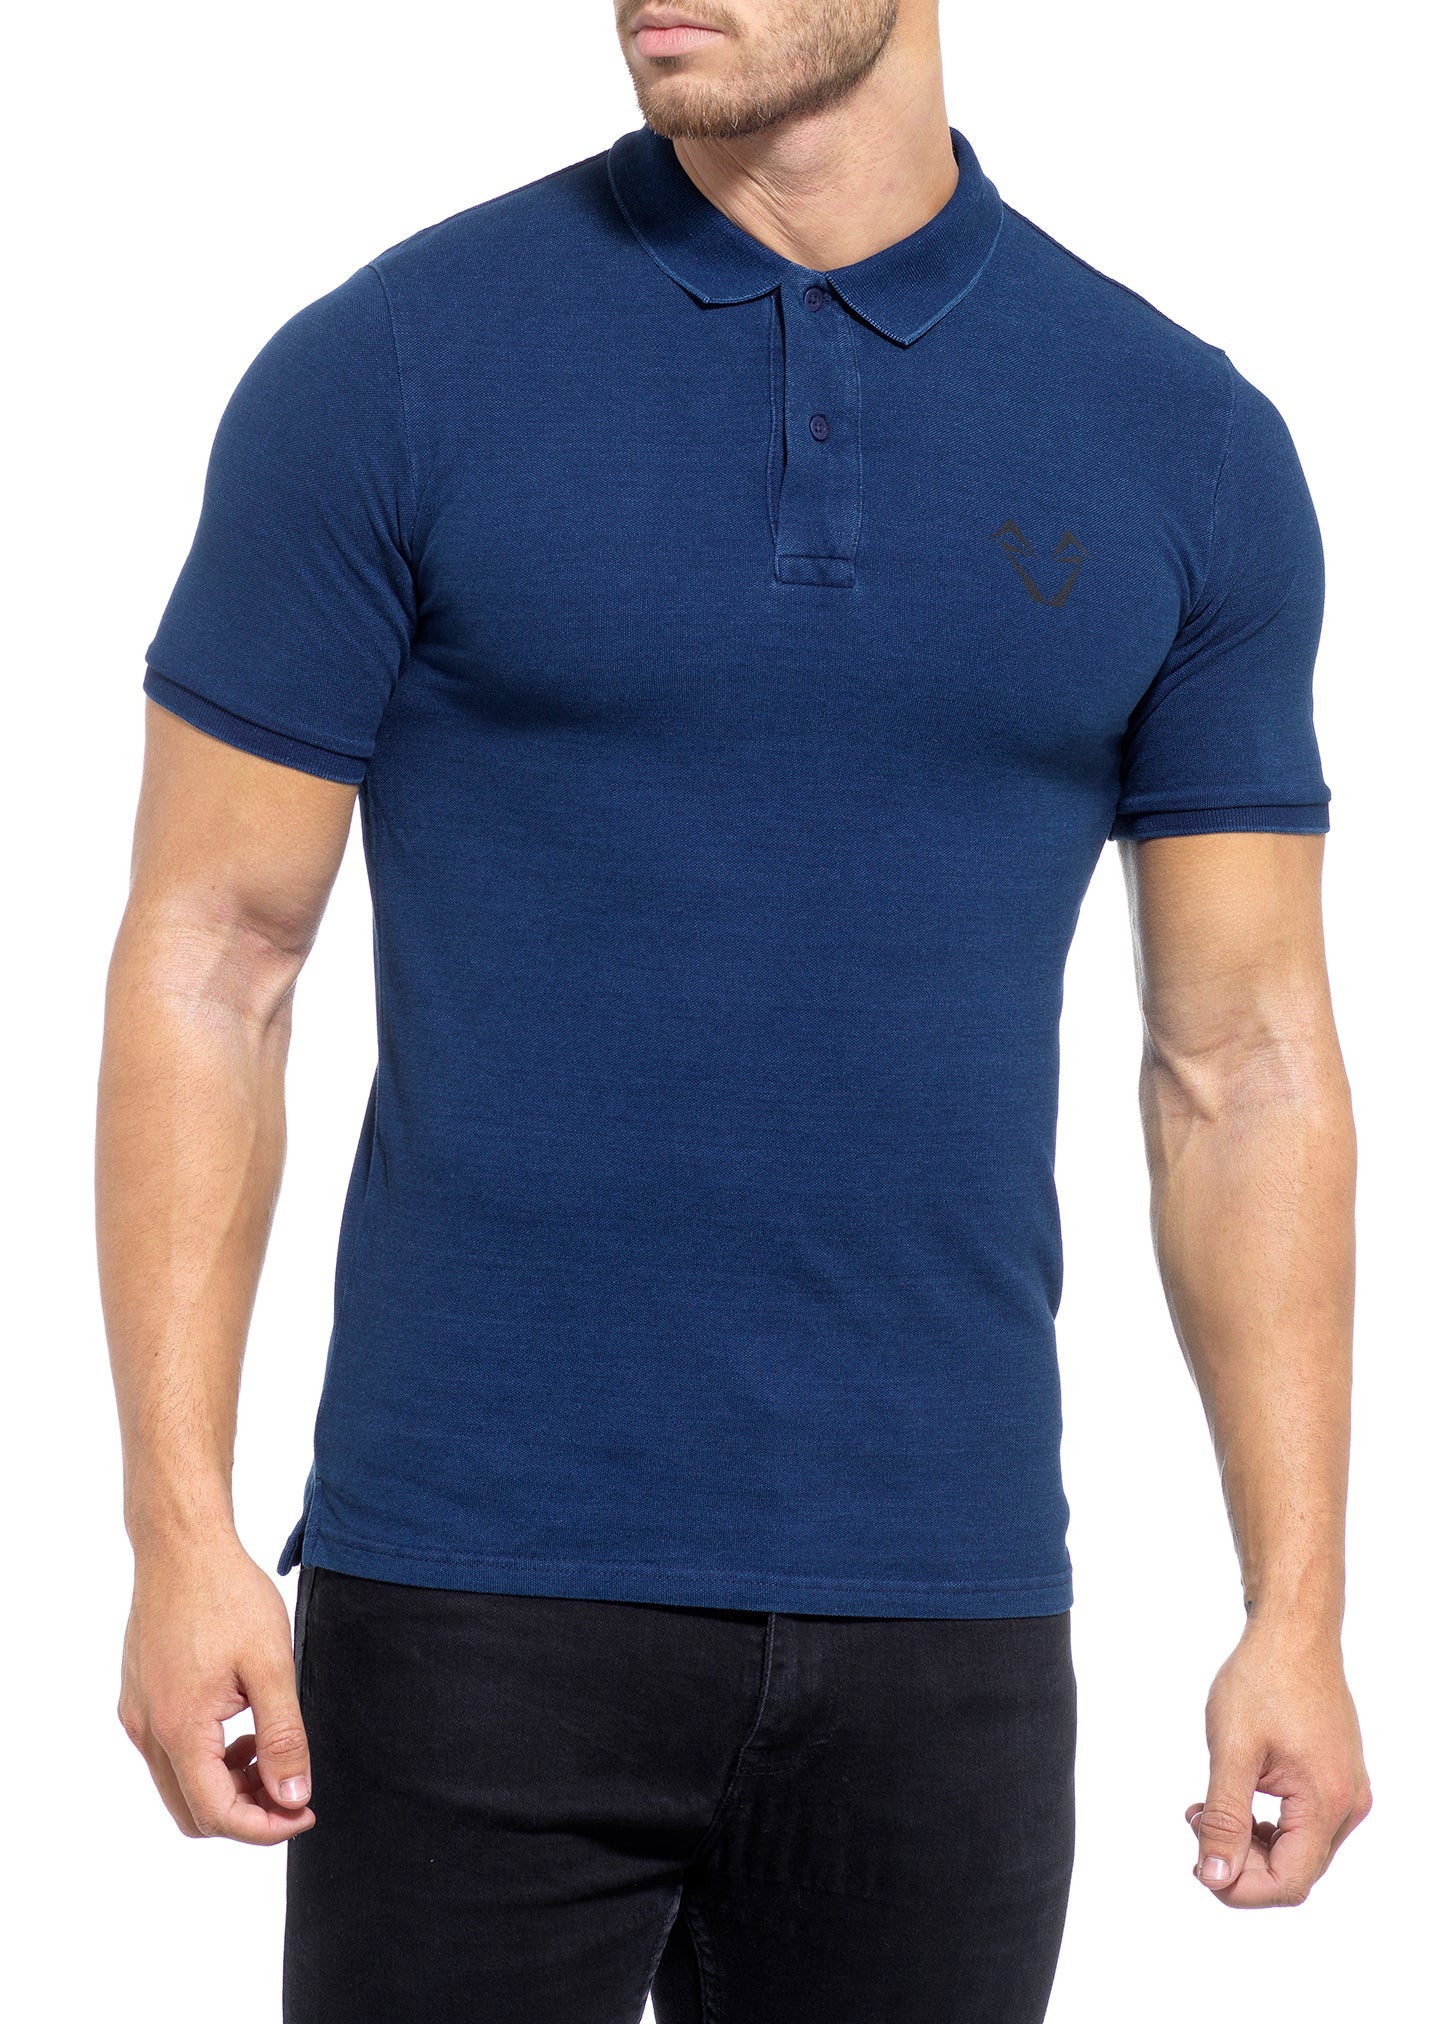 Muscle Fit Polo Shirts